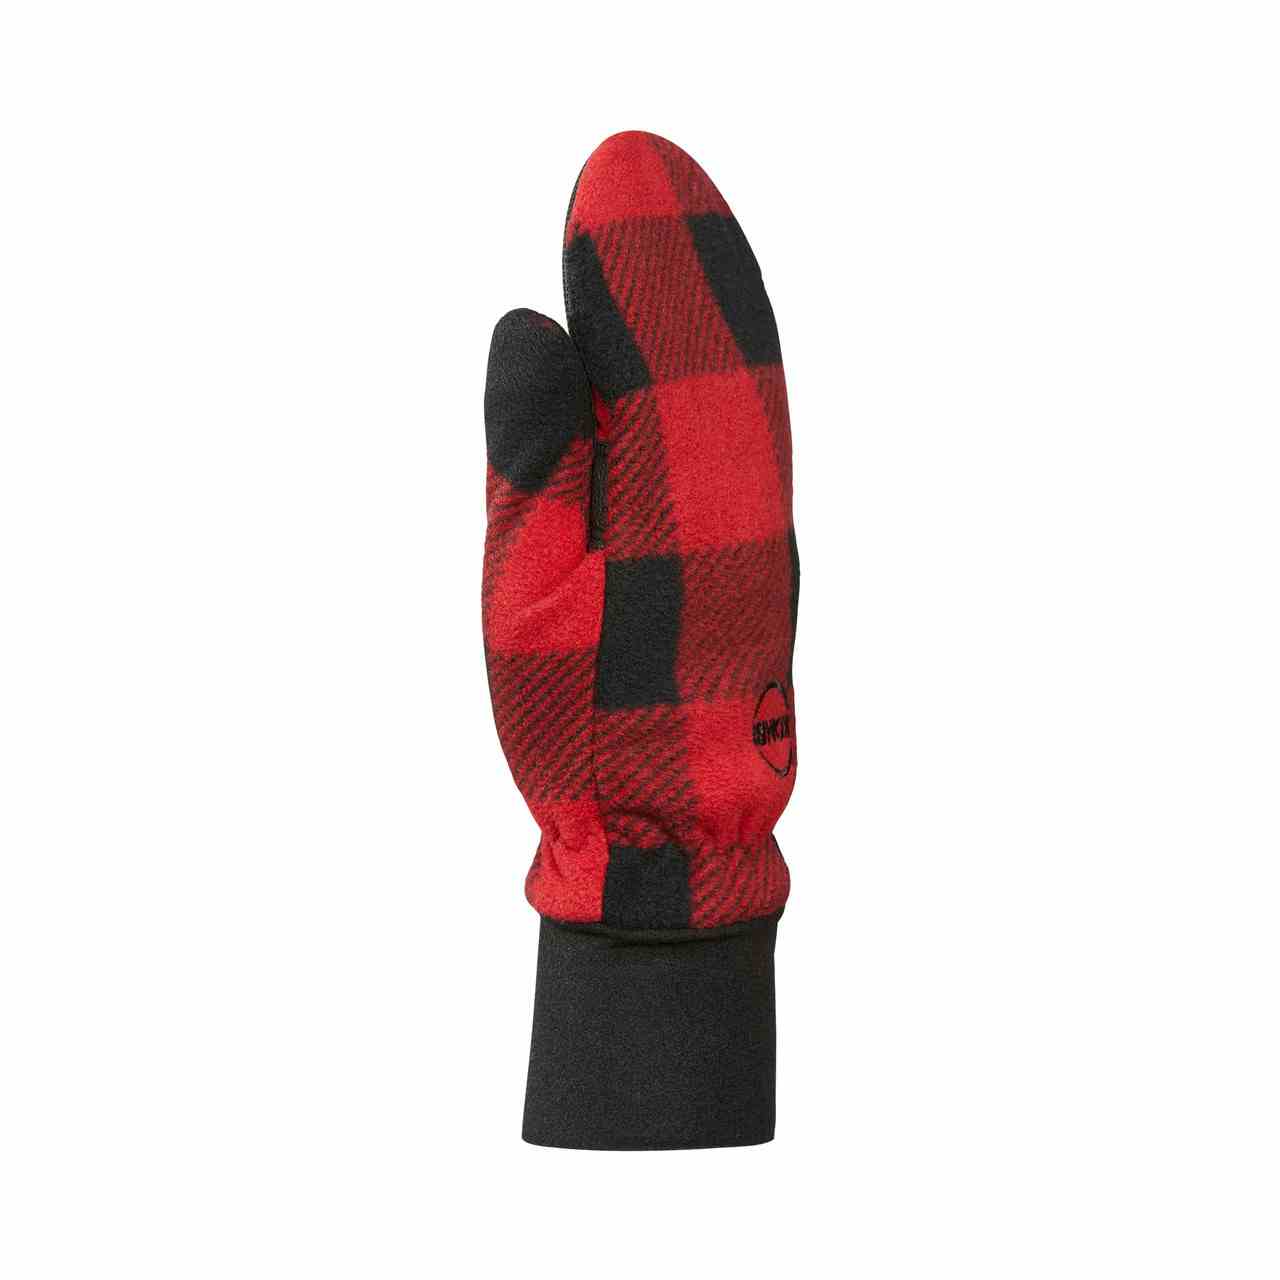 The Windguardian Mitts Red Buffalo Plaid